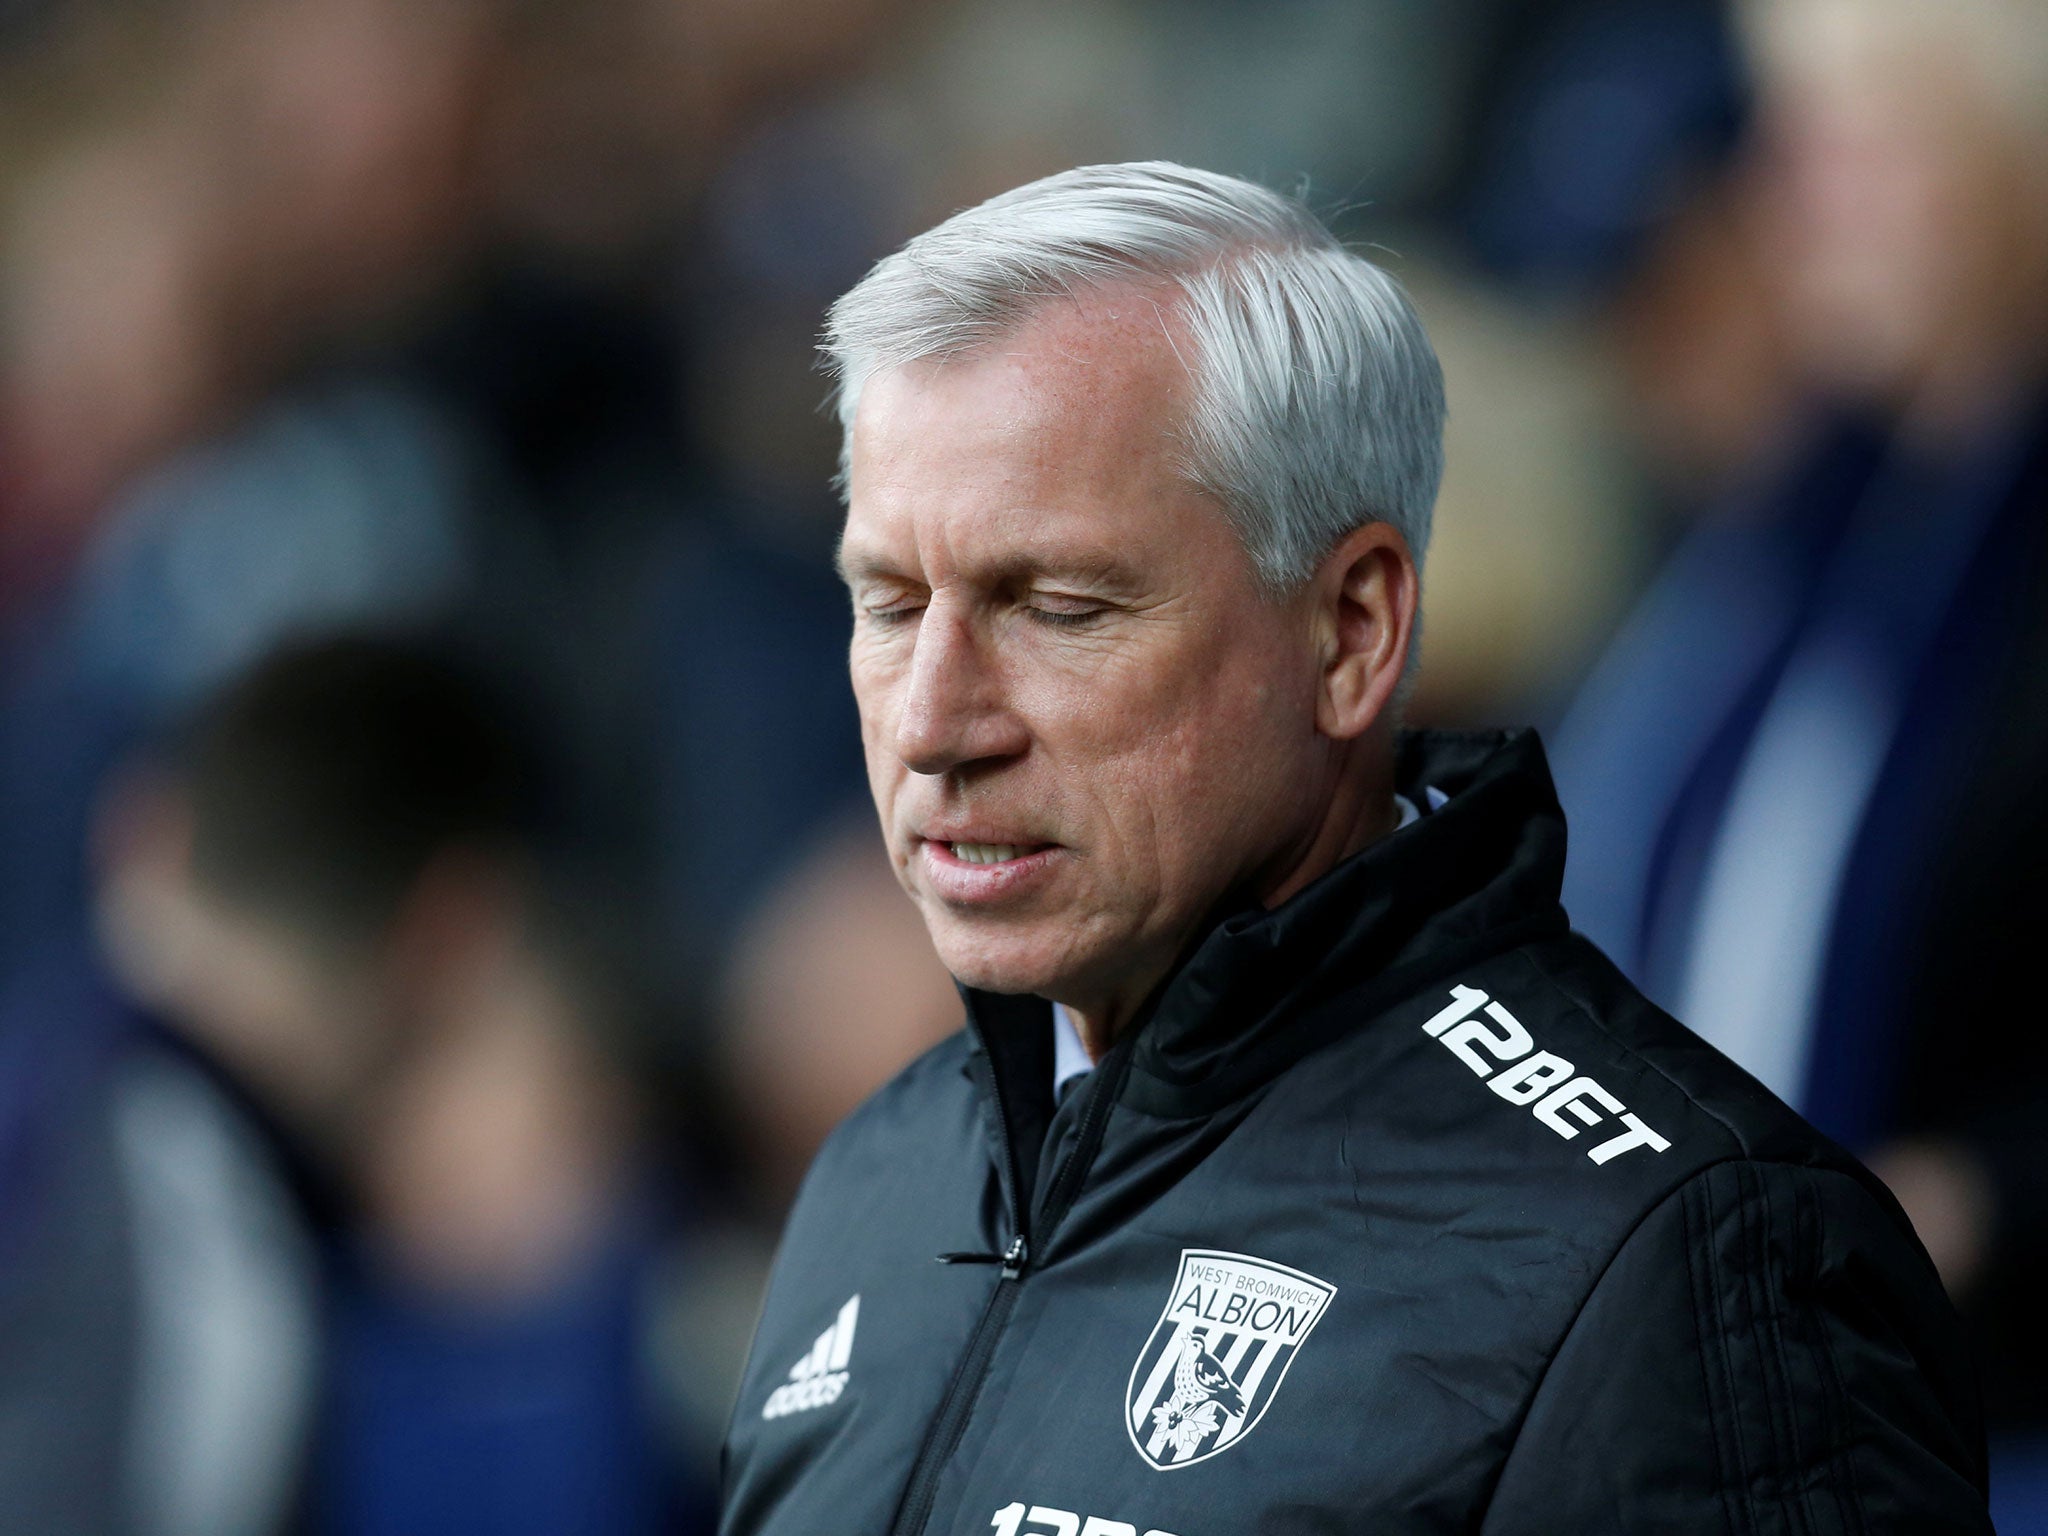 Alan Pardew left West Brom on Monday with the club close to relegation